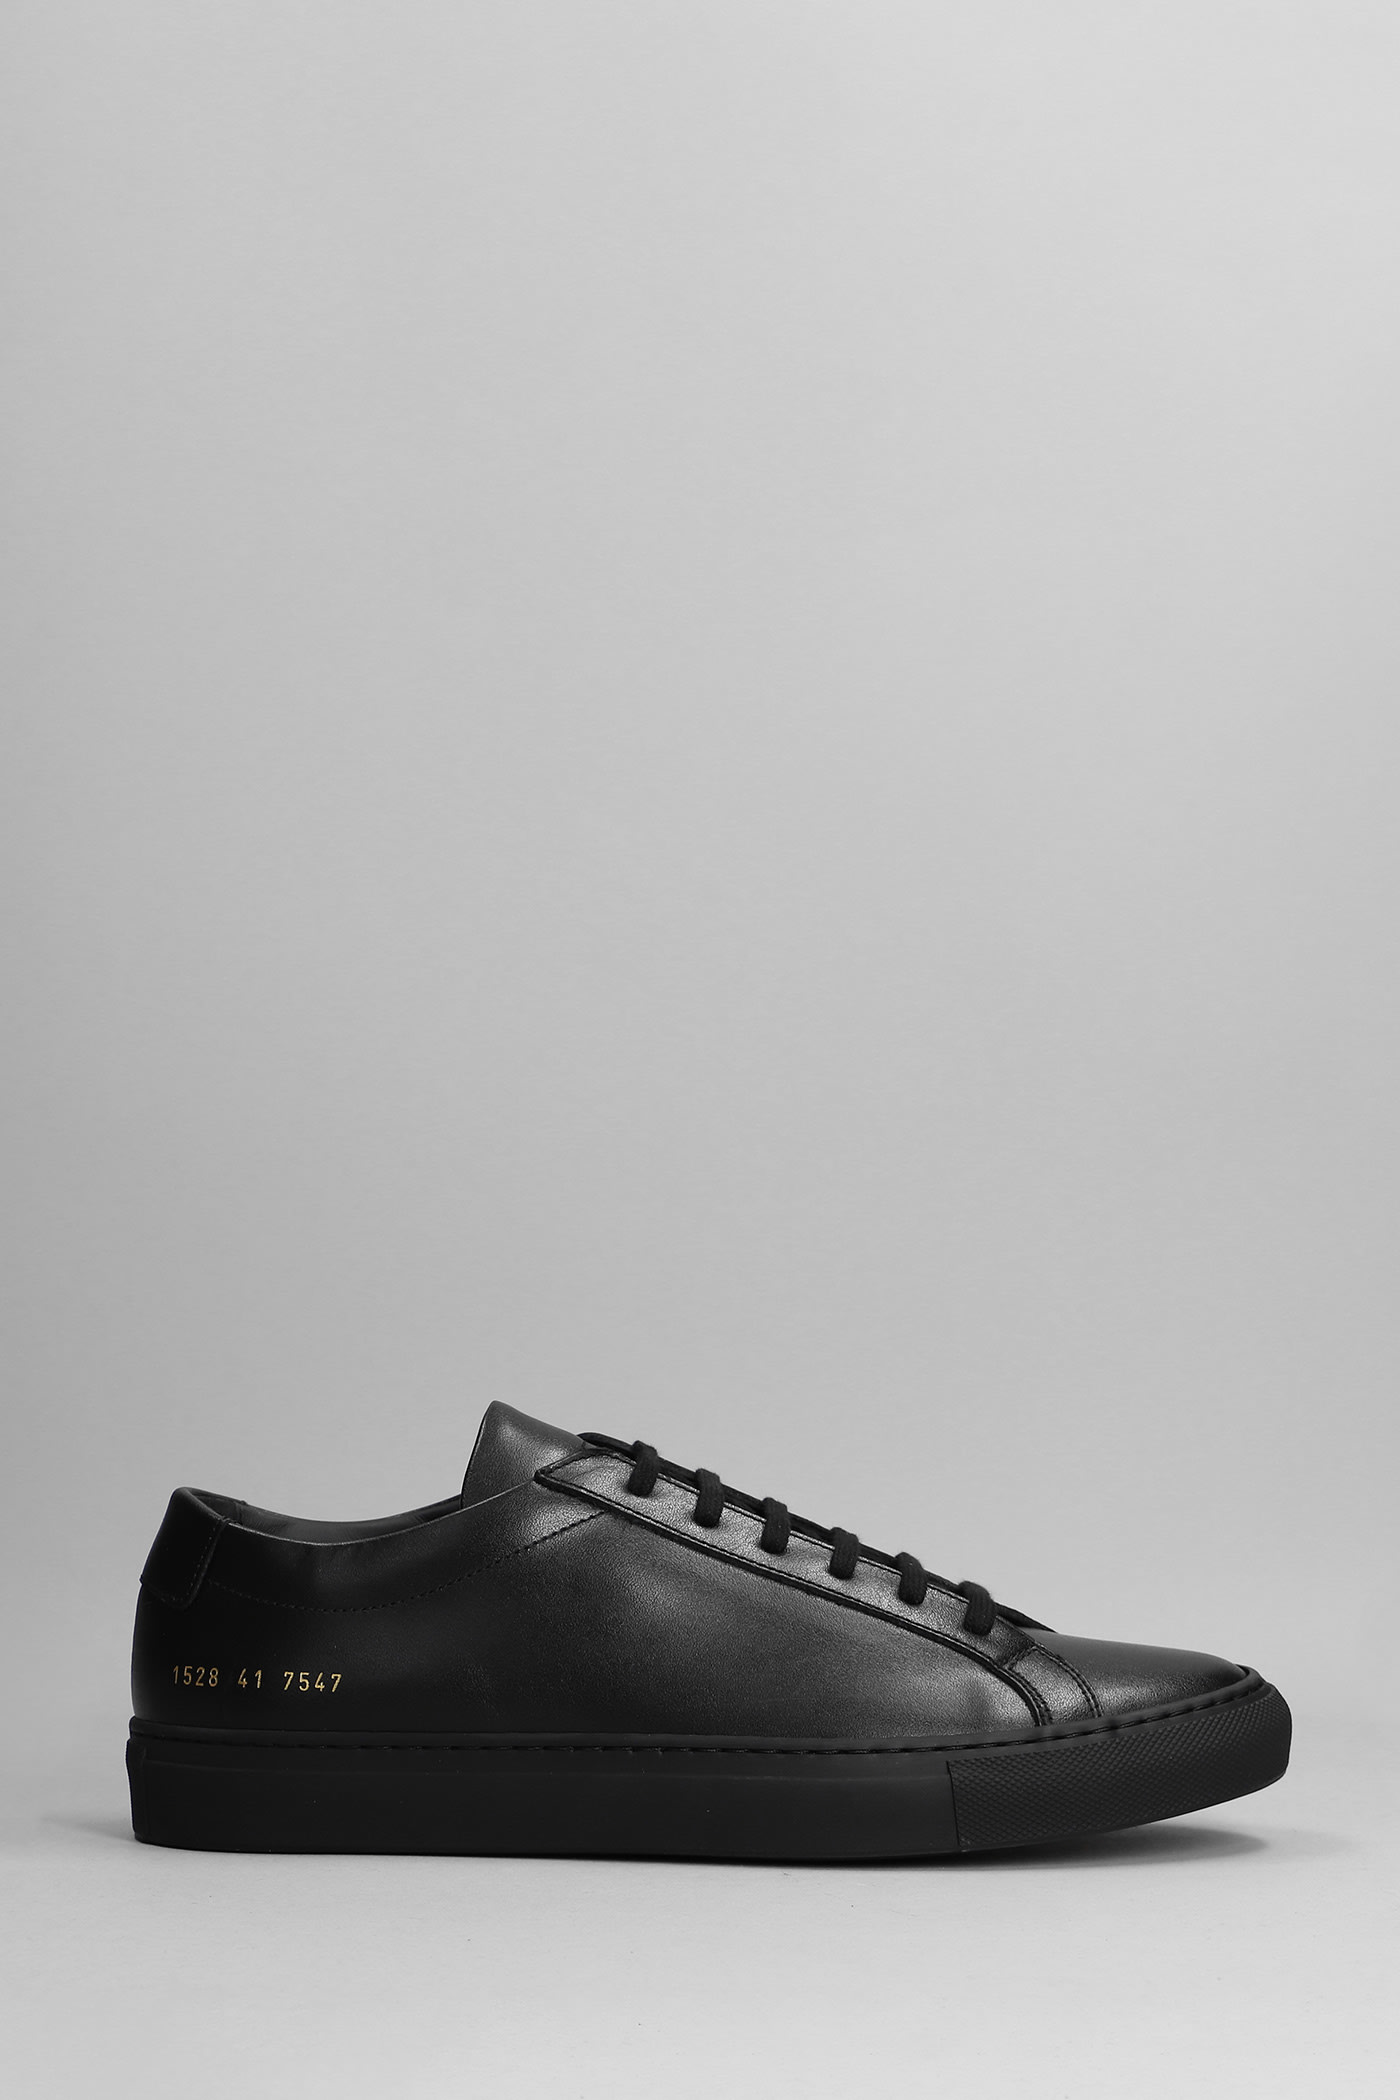 Common Projects Original Achilles Sneakers In Black Leather